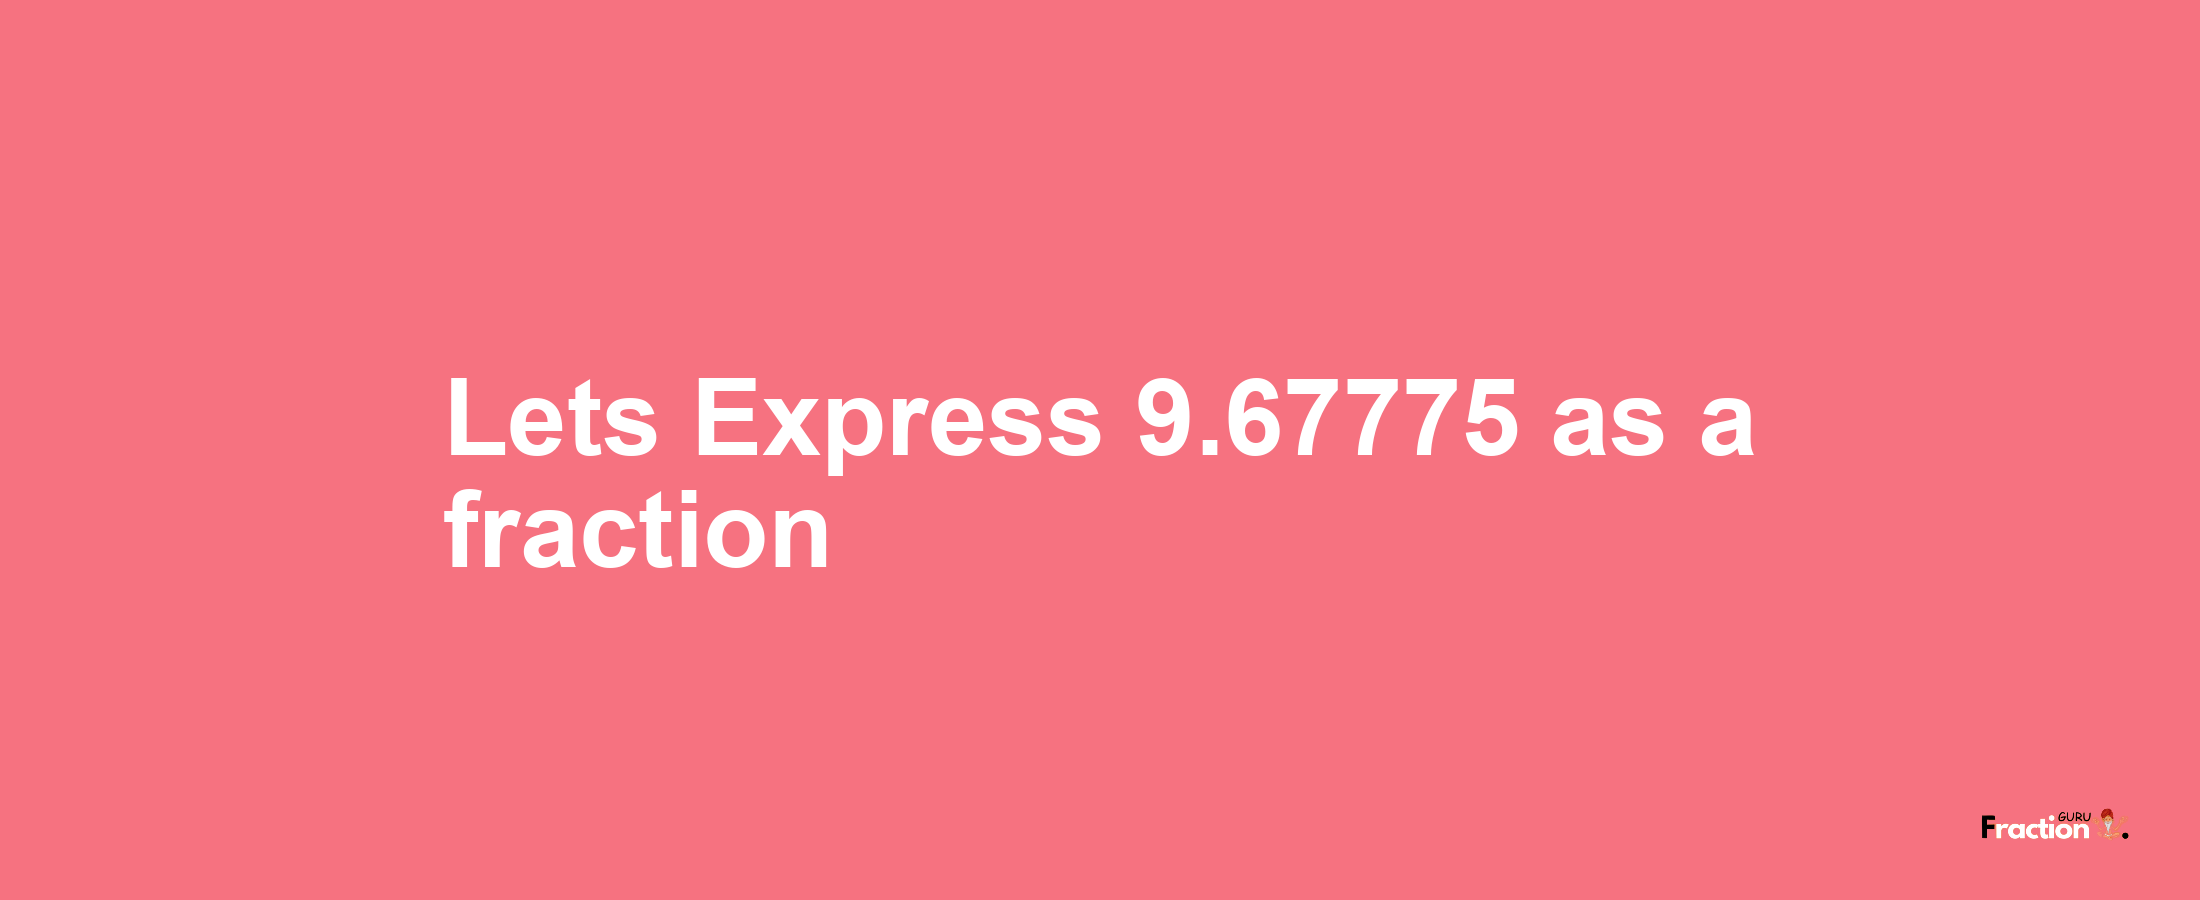 Lets Express 9.67775 as afraction